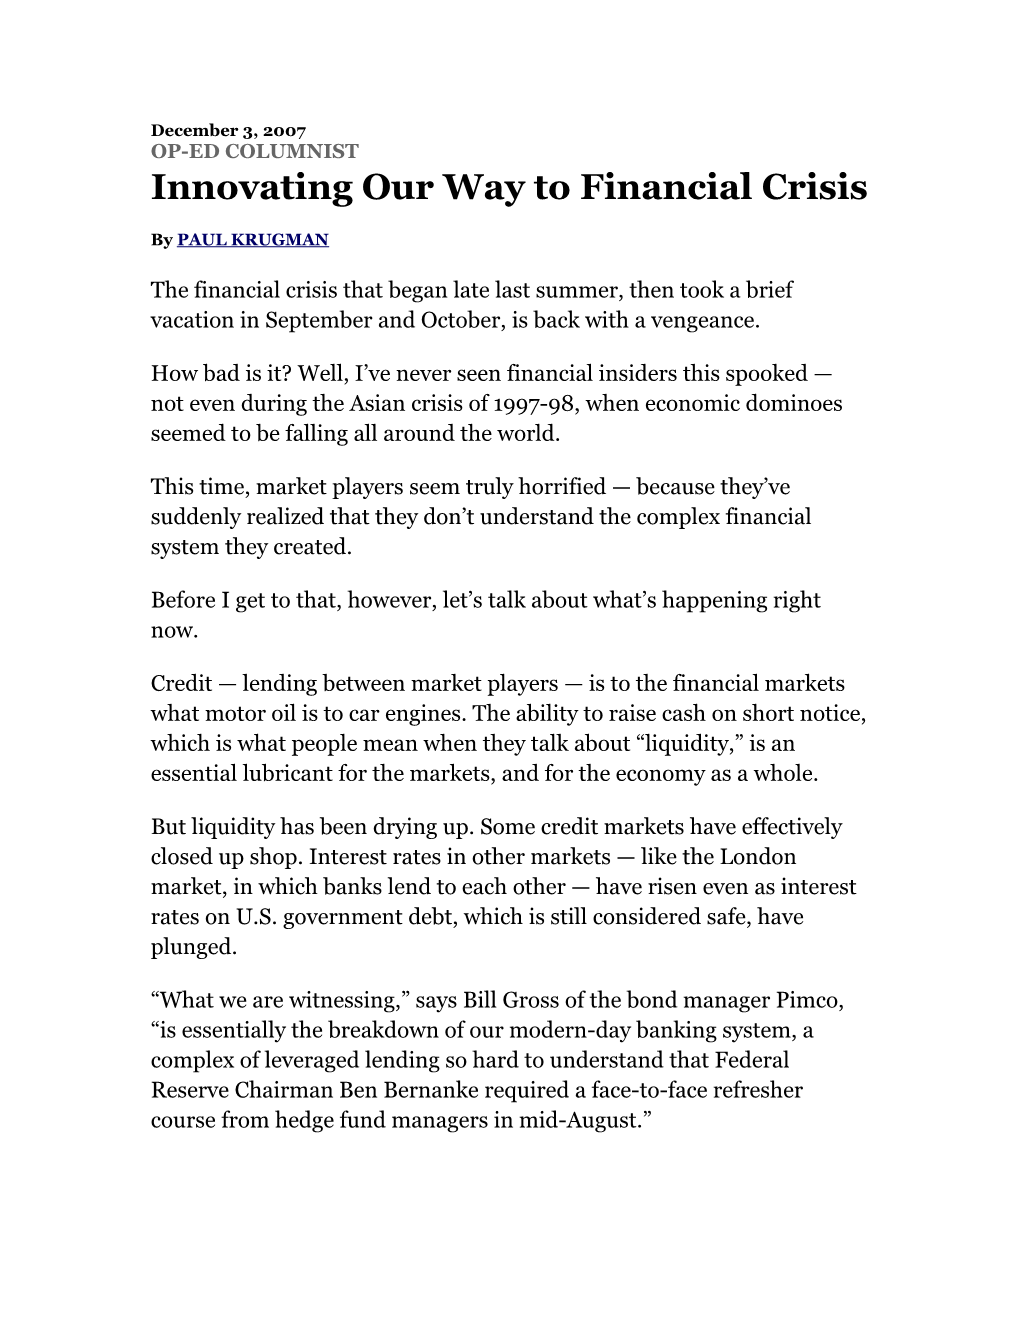 Innovating Our Way to Financial Crisis